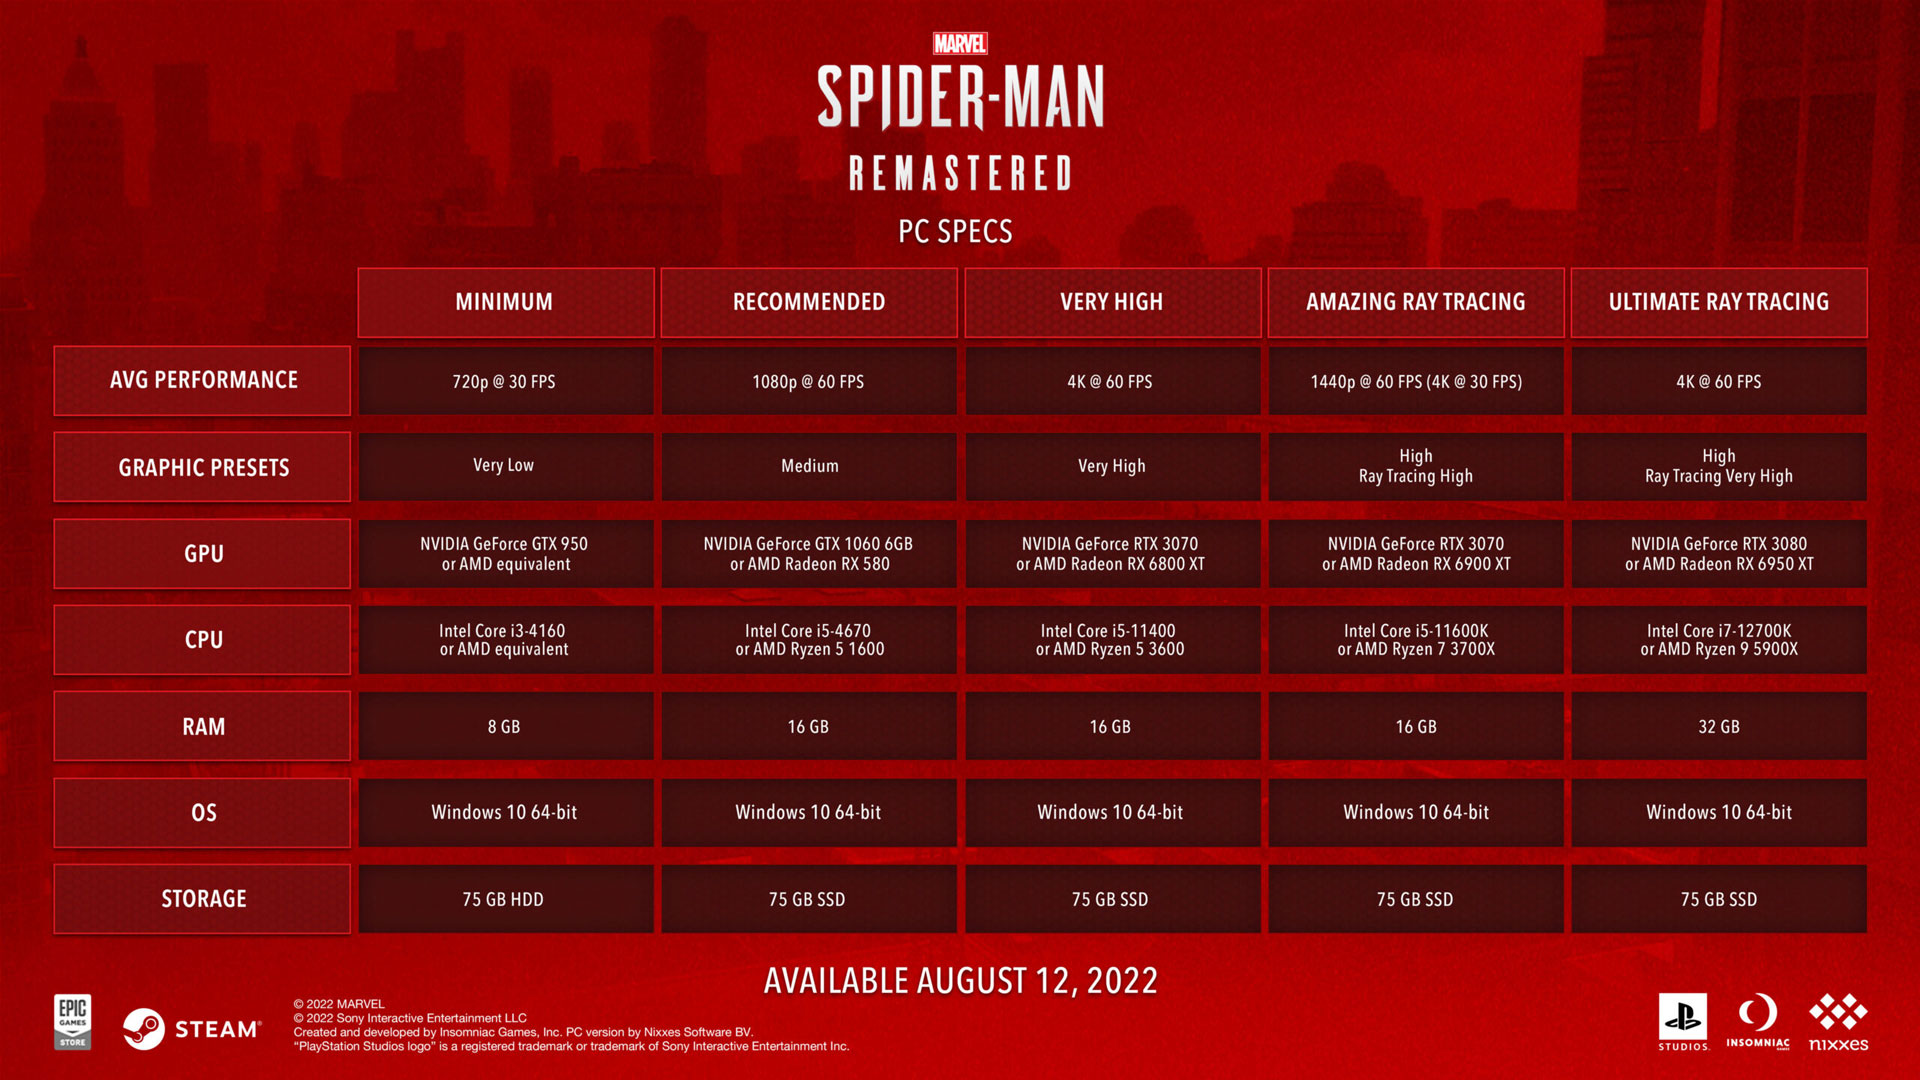 Marvel's Spider-Man Remastered  Download and Buy Today - Epic